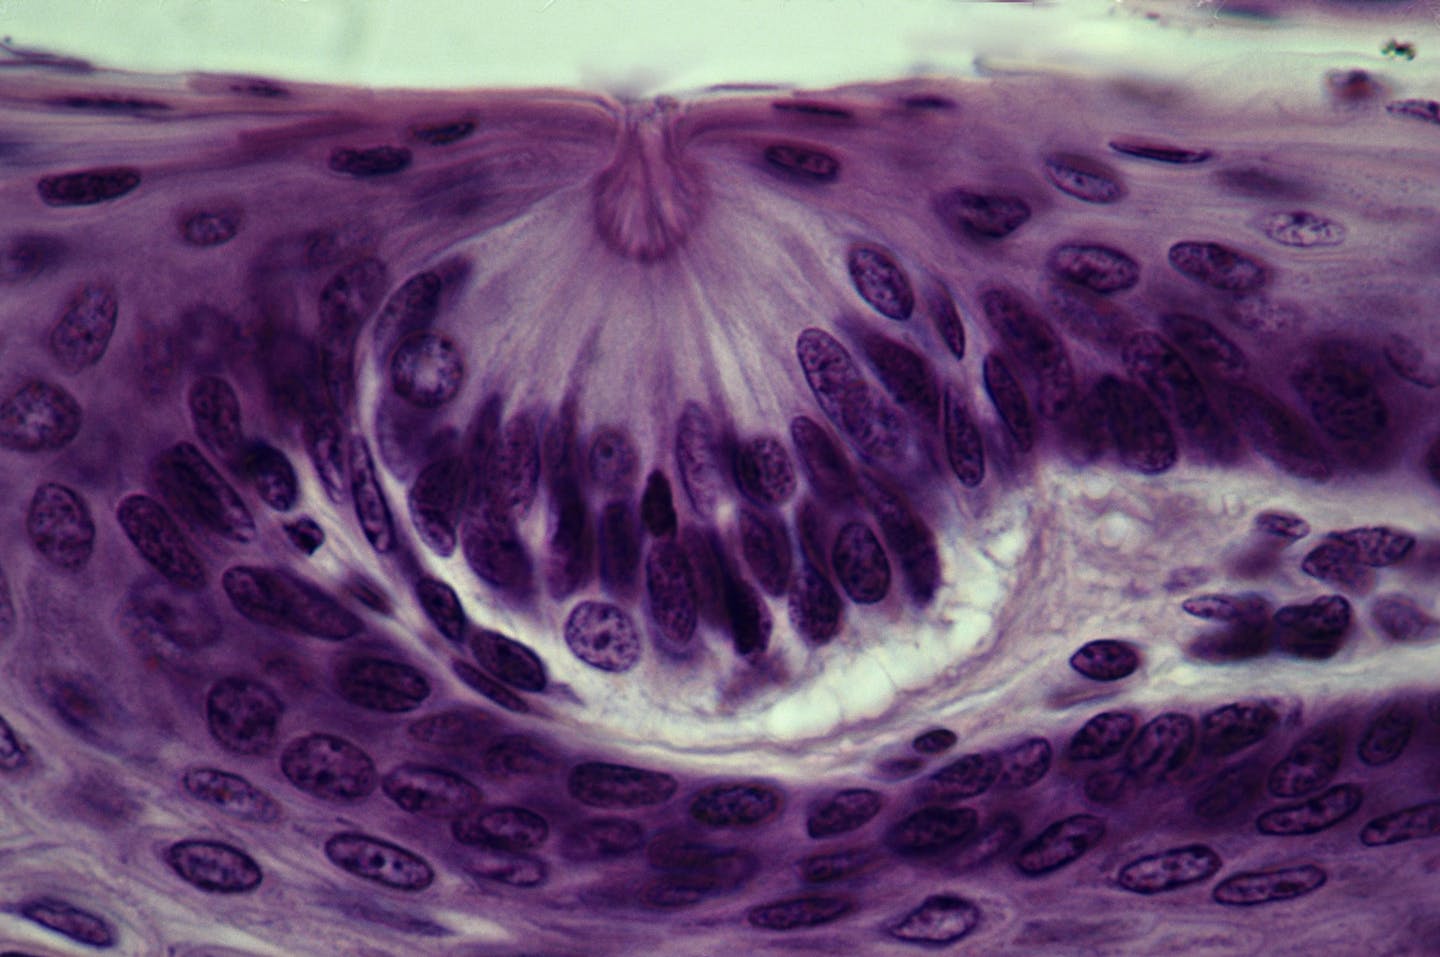 Microscopic view of cells just below the surface of the tongue.